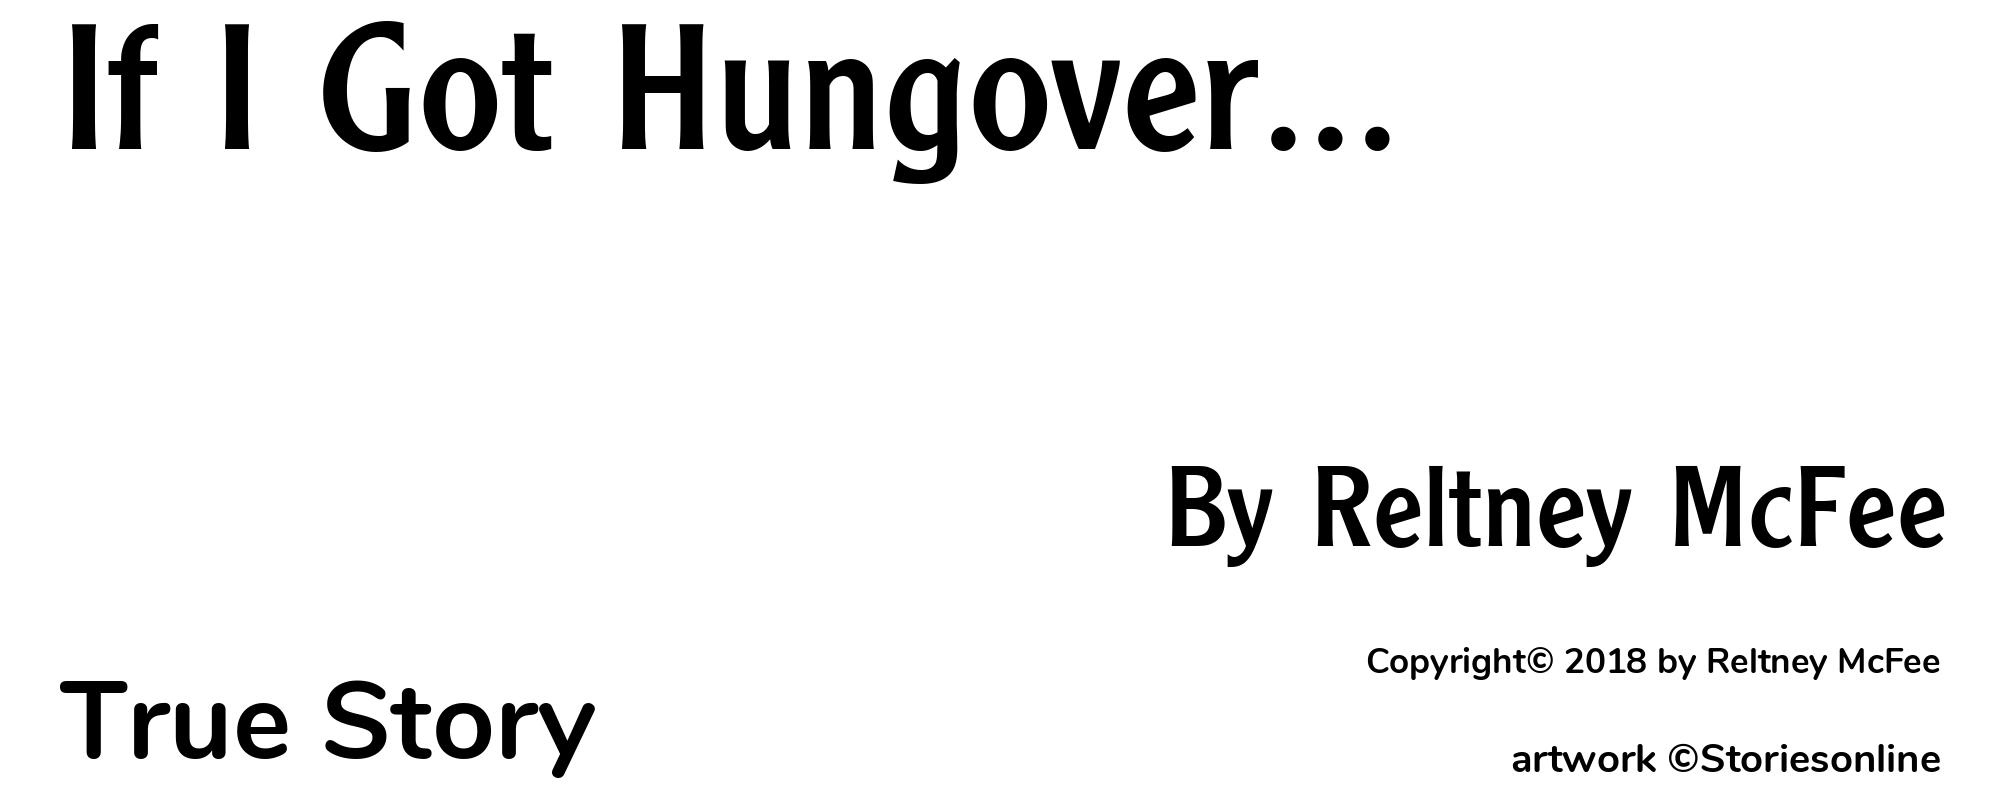 If I Got Hungover... - Cover